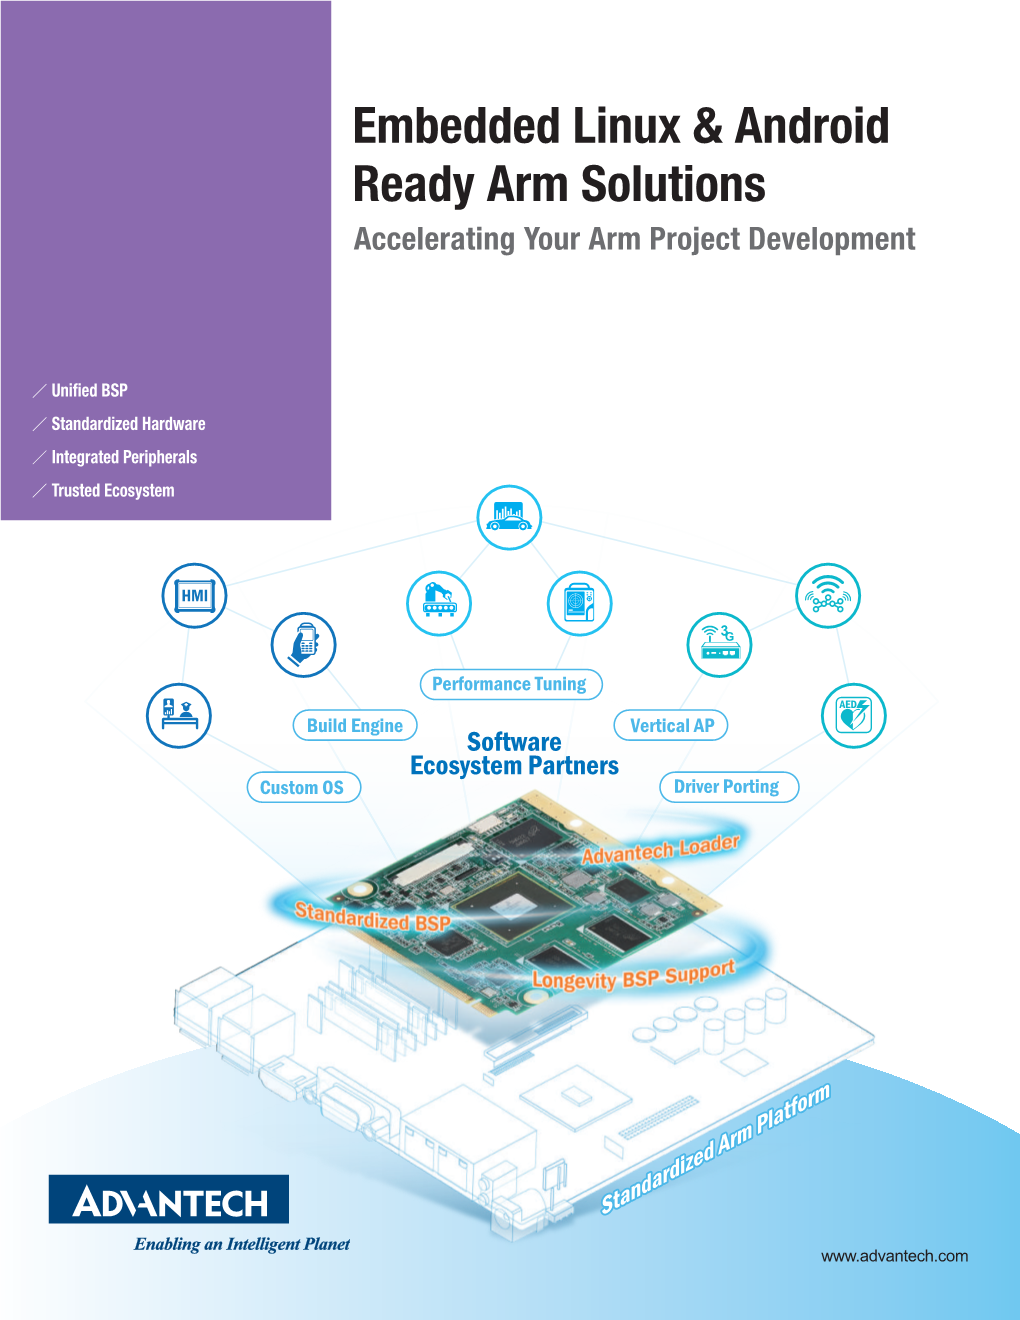 Embedded Linux & Android Ready Arm Solutions